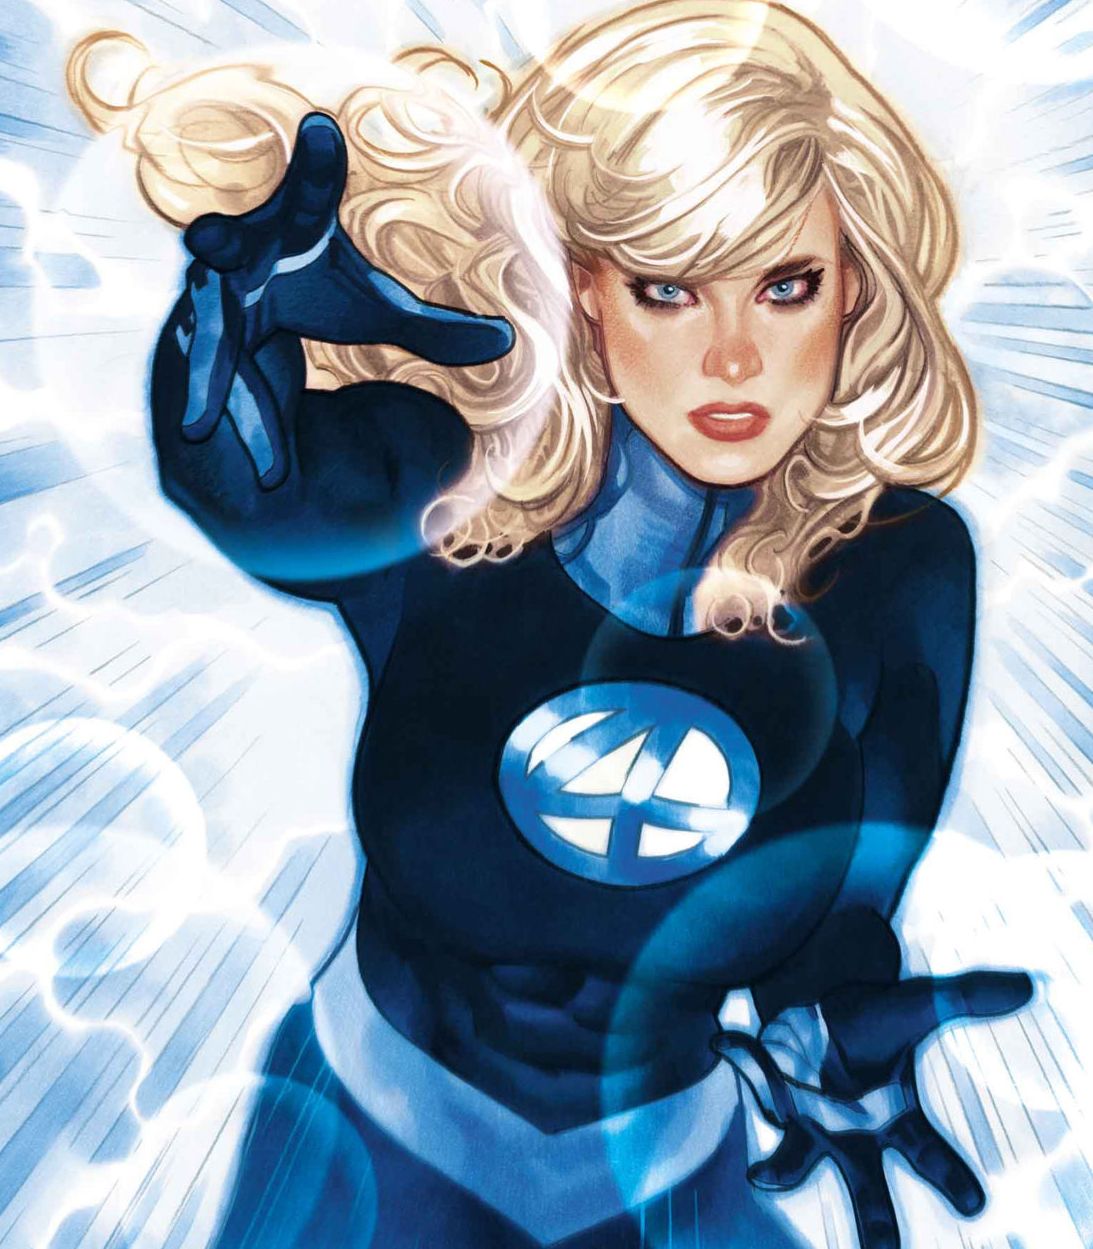 Invisible Woman #1 by Adam Hughes